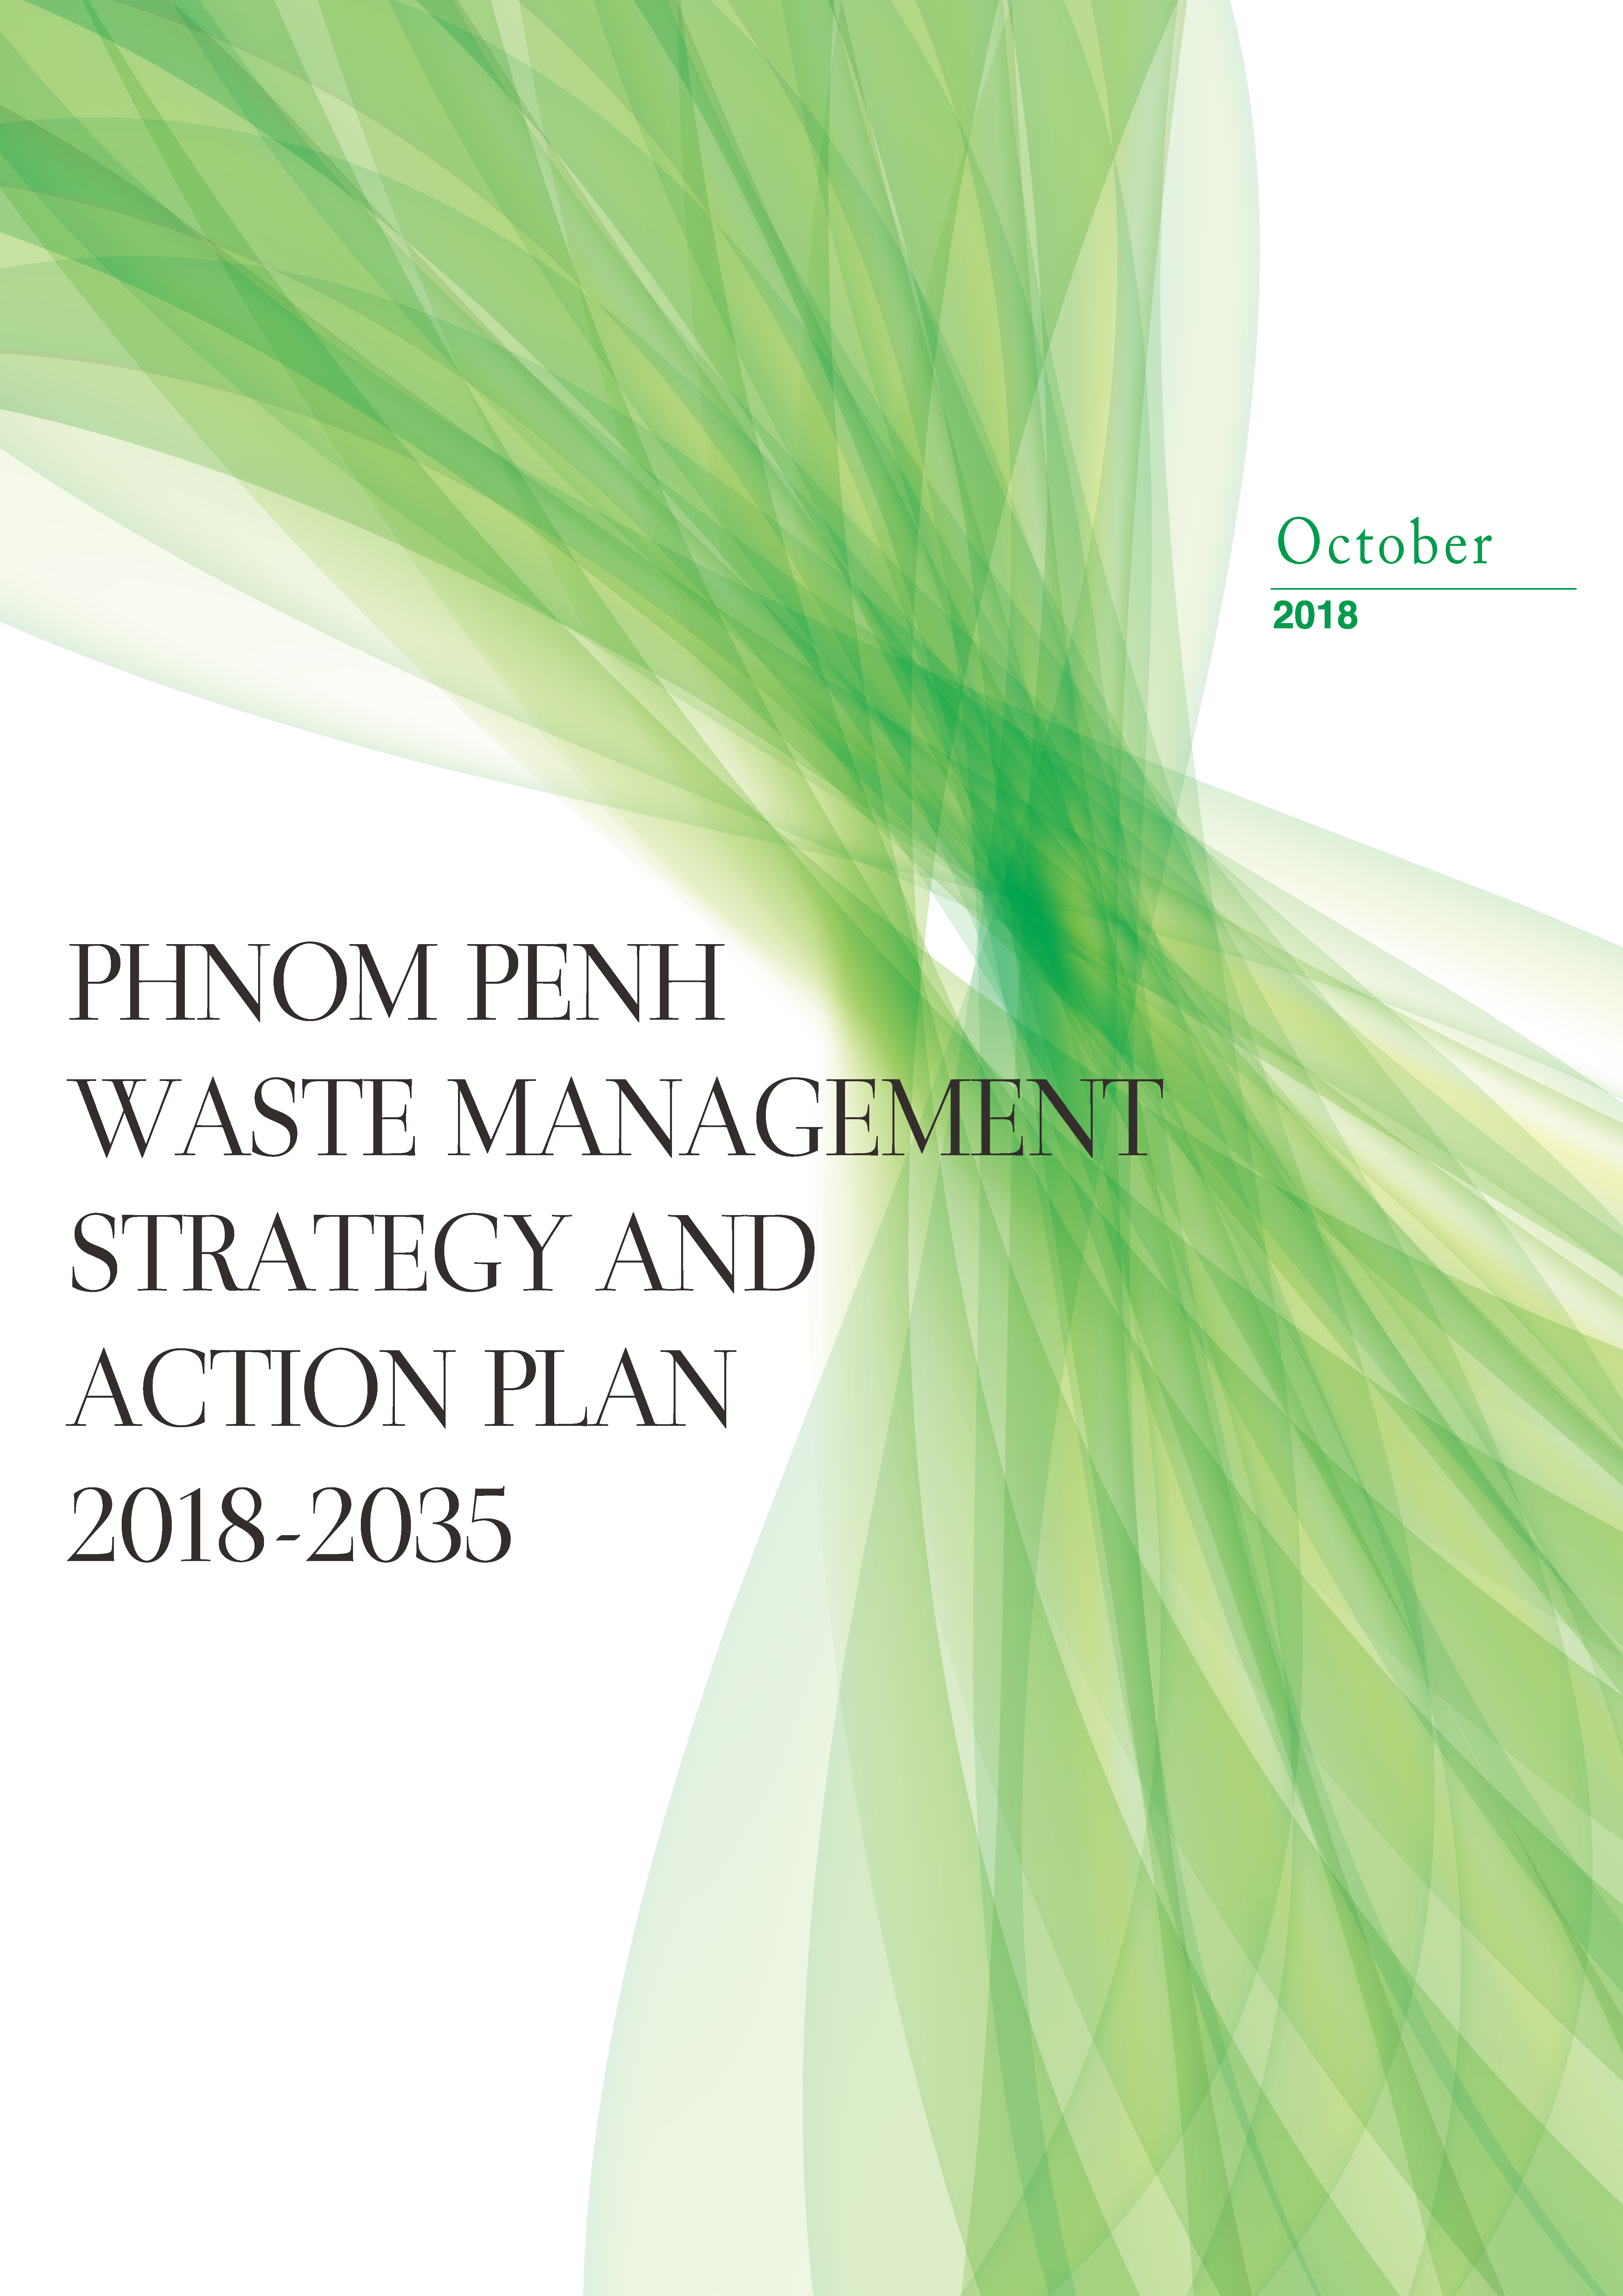 Phnom Penh Waste Management Strategy and Action Plan 2018-2035